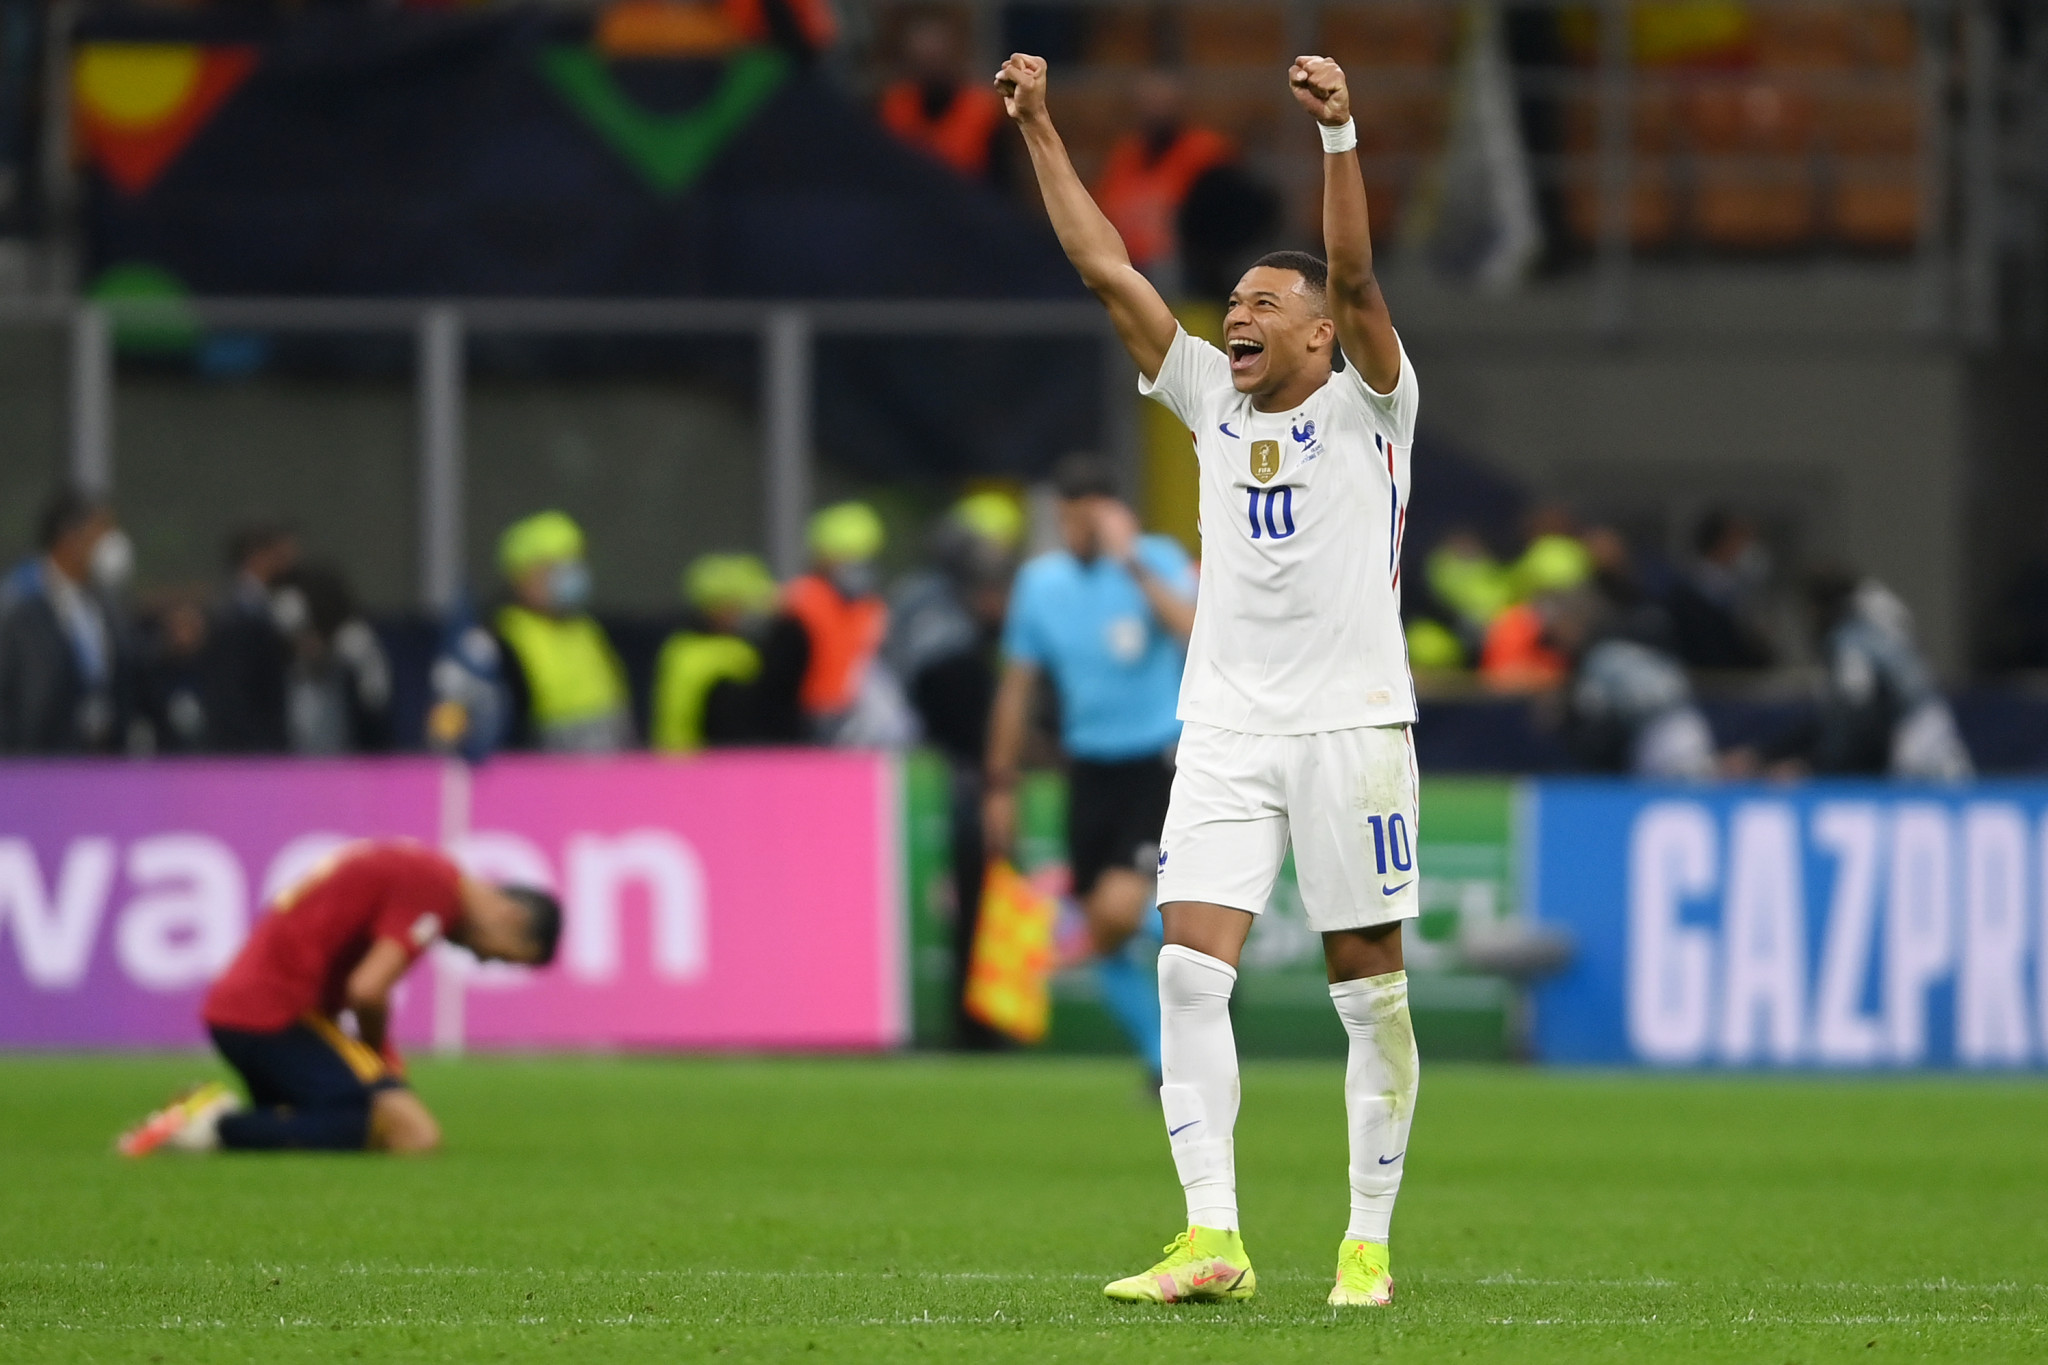 France come from behind again to claim UEFA Nations League title